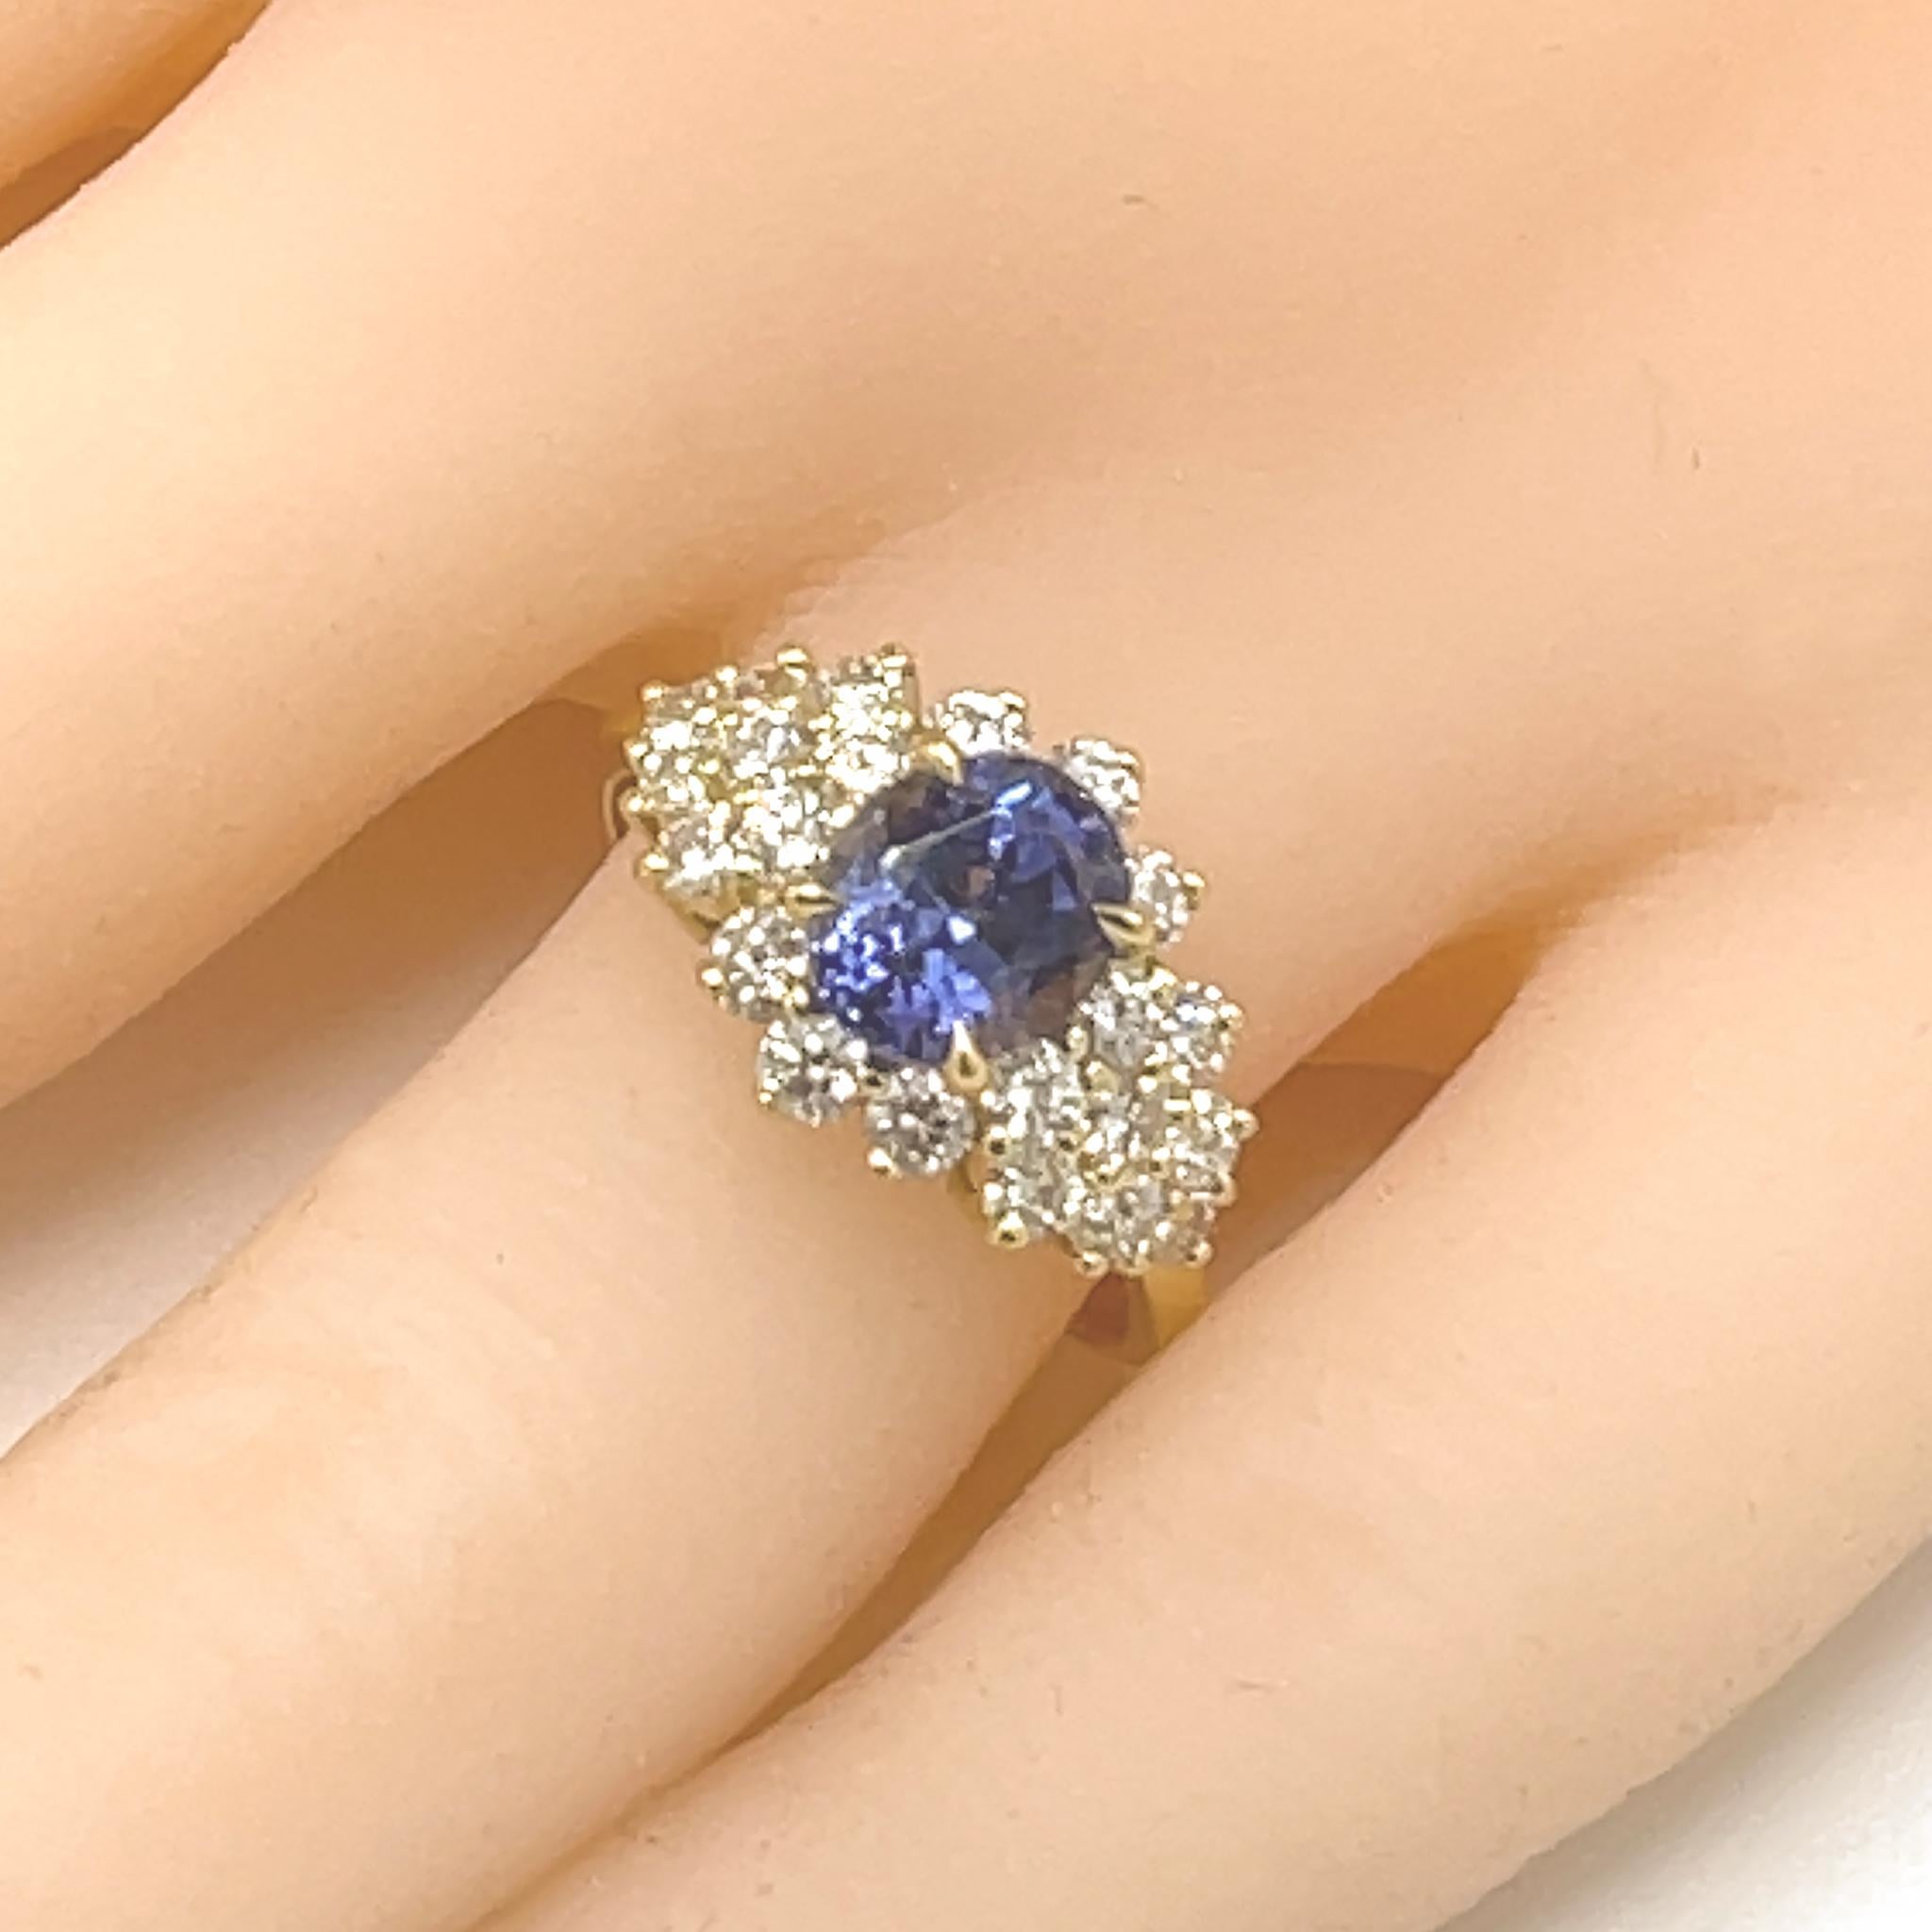 18 kt Yellow Gold
Tanzanite: 2.09 tcw (estimated)
Diamond: 1.05 ct twd (estimated)
Ring Size: 7.5
Total Weight: 5.12 grams